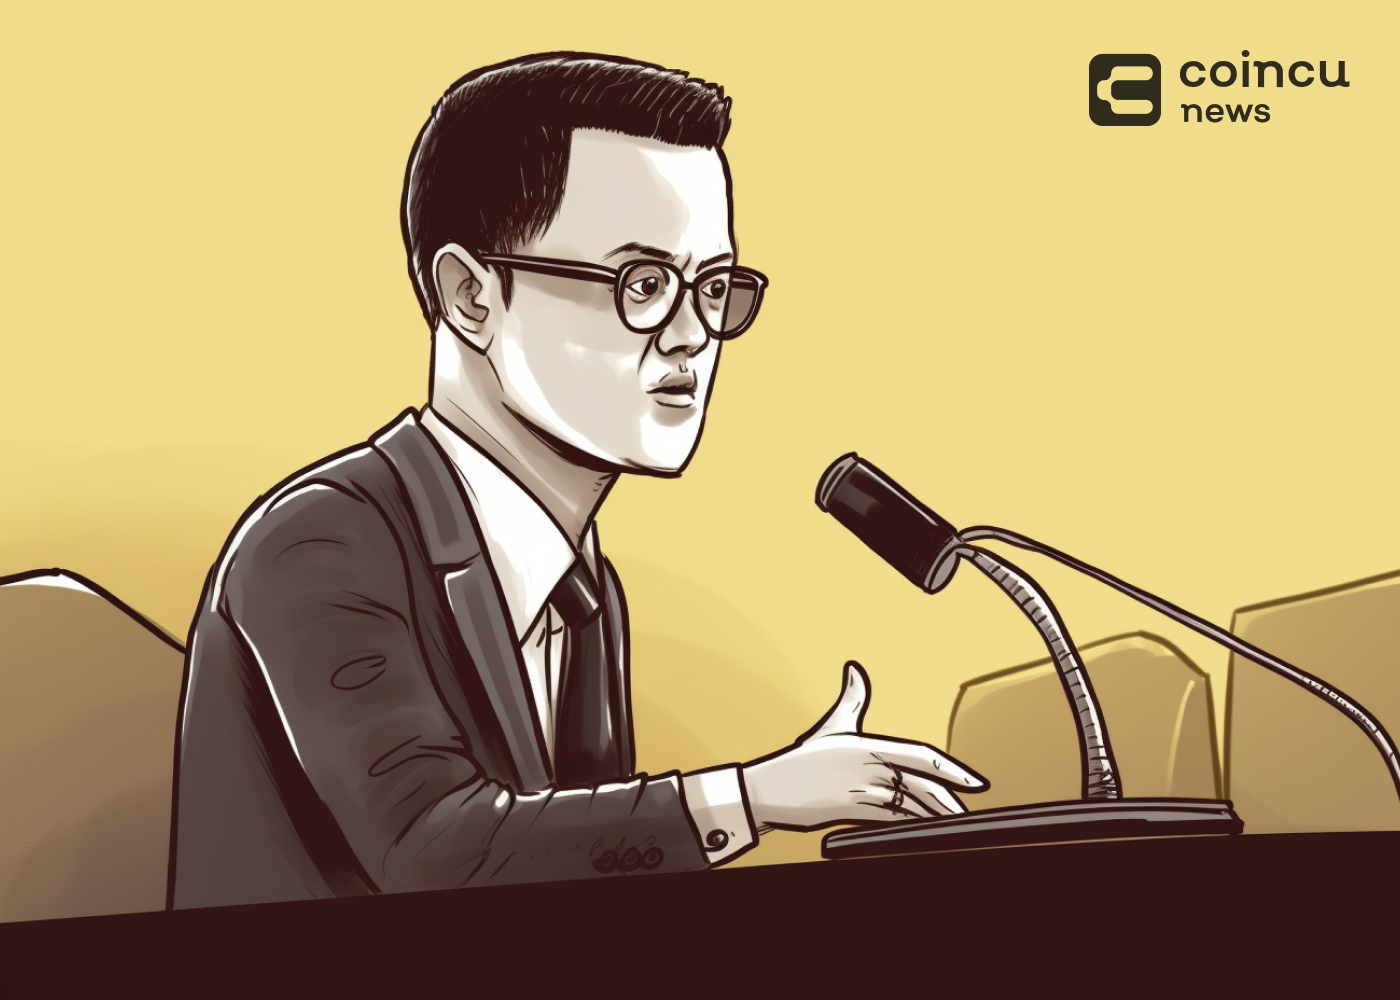 Binance CEO: Singapore More Cautious With Crypto After The FTX Crisis